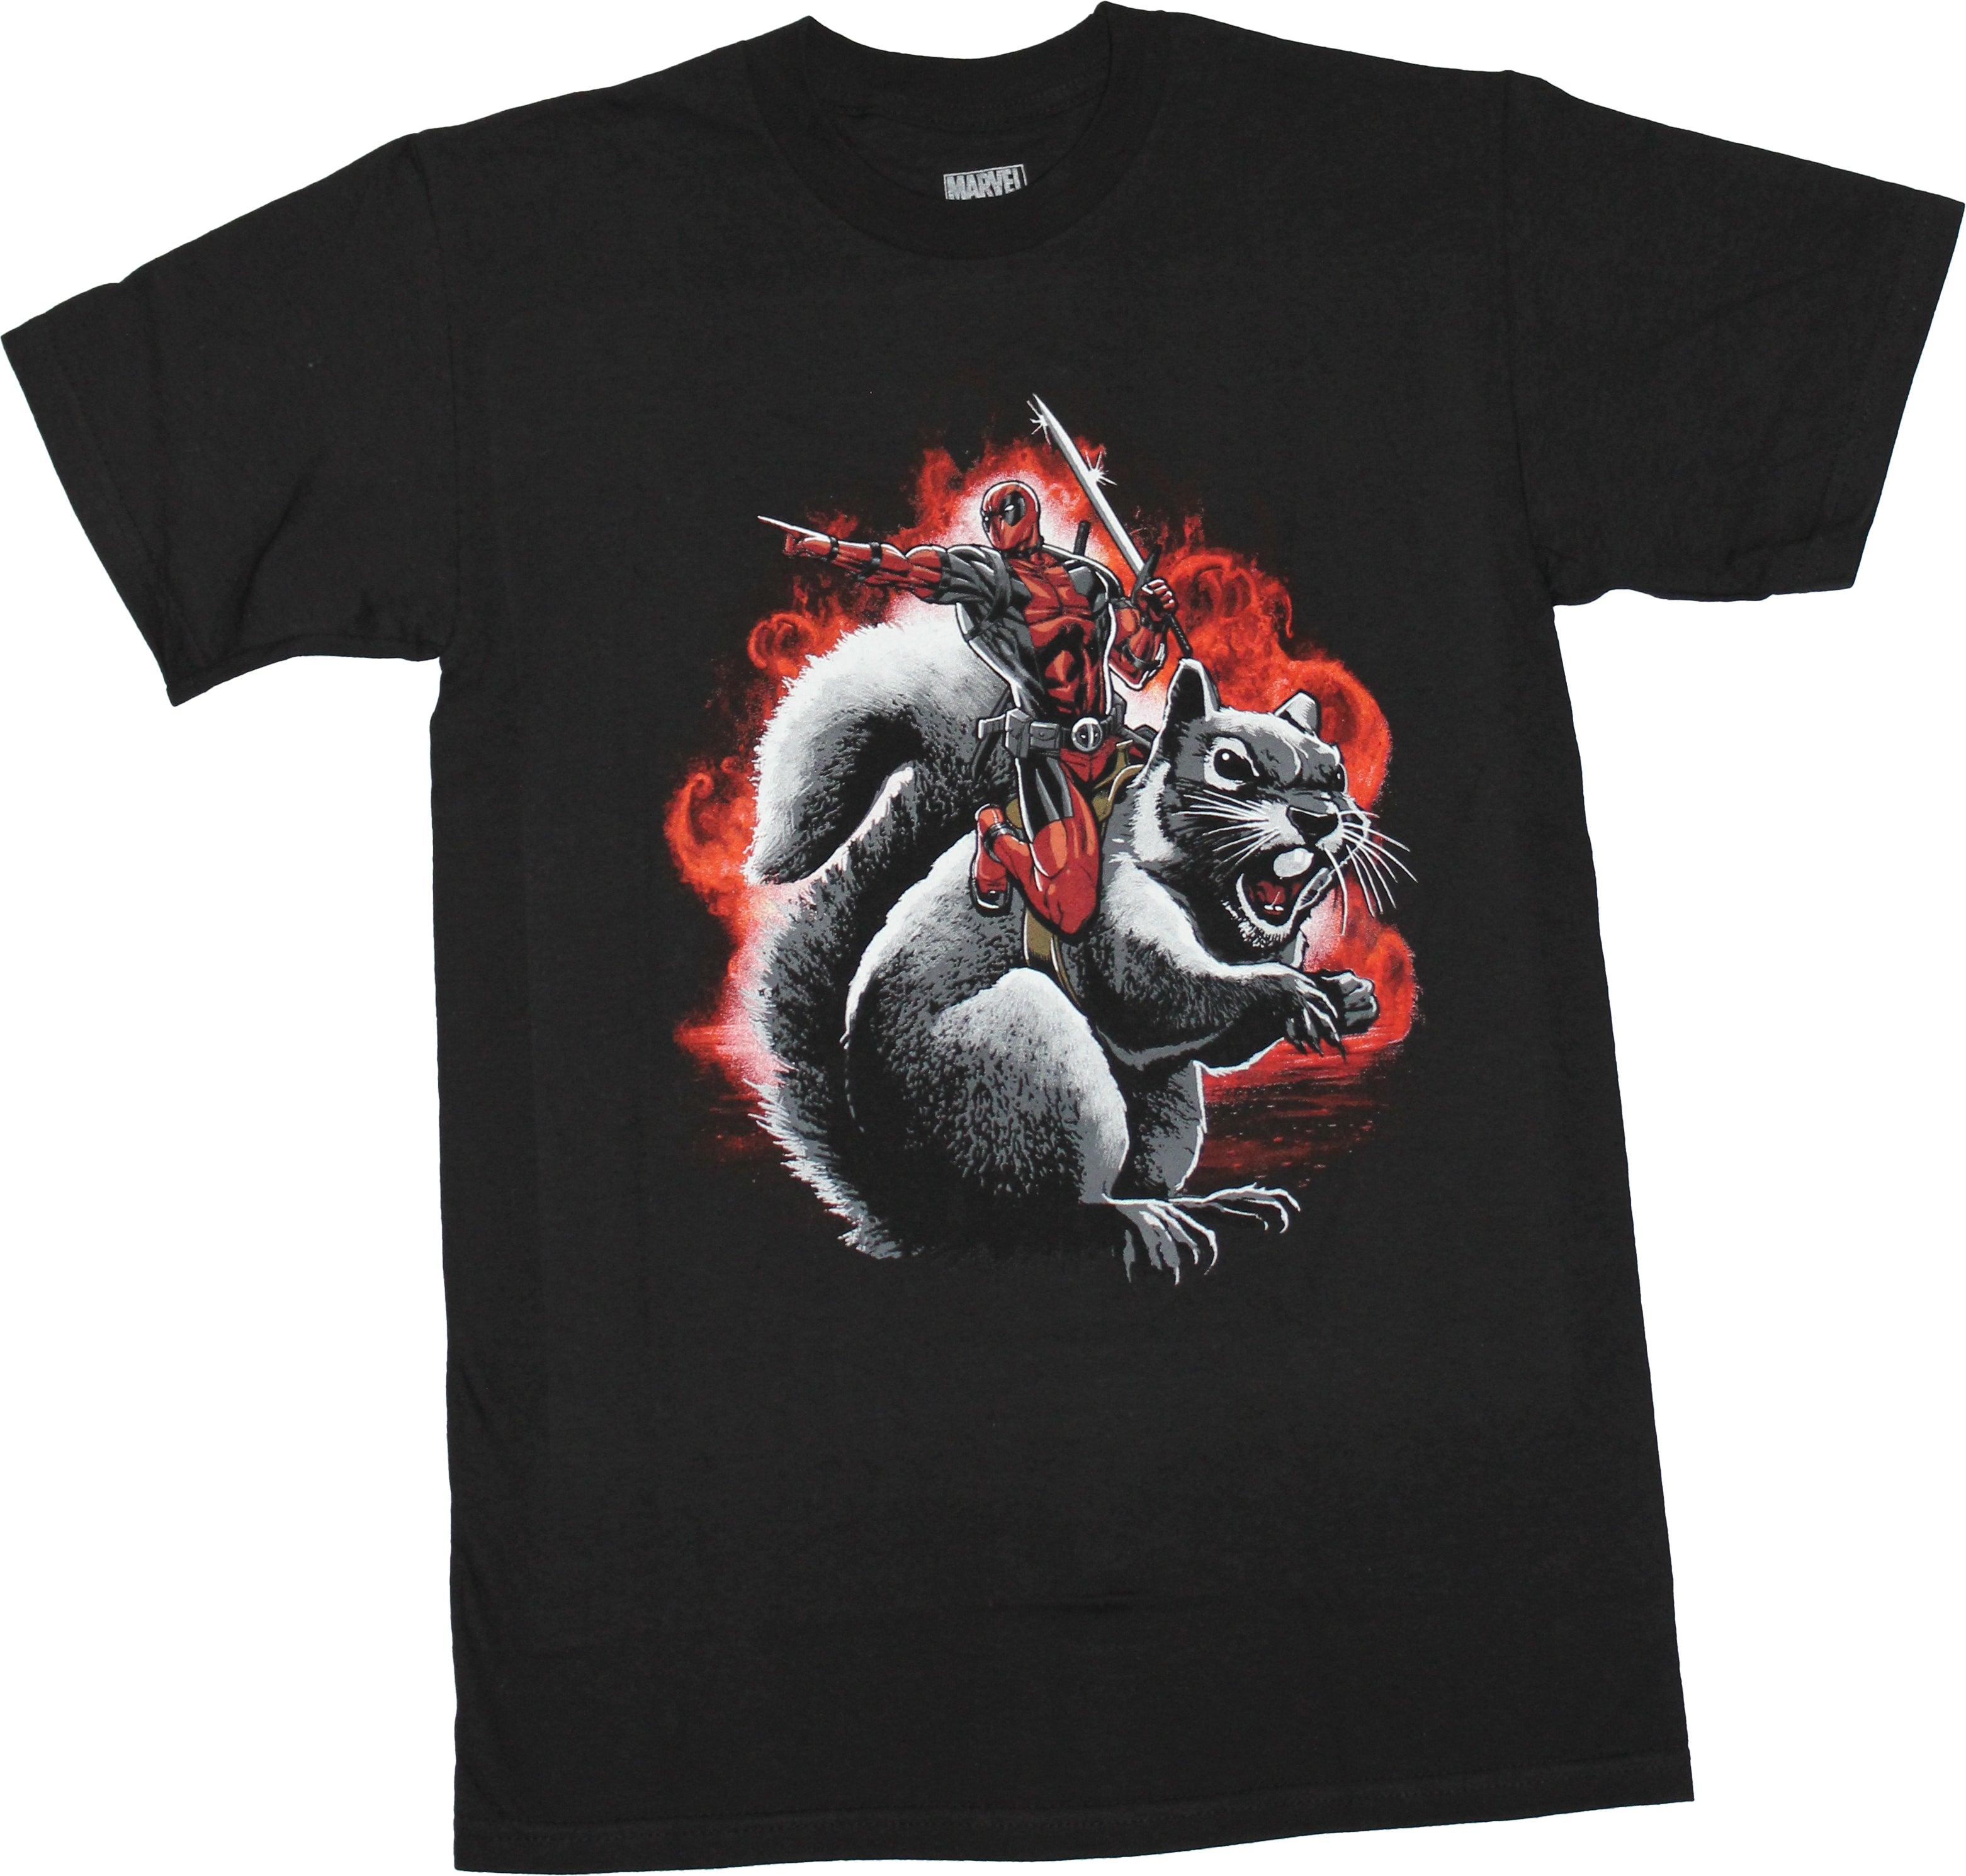 Deadpool Mens T-Shirt - Pointing While Riding Squirrel